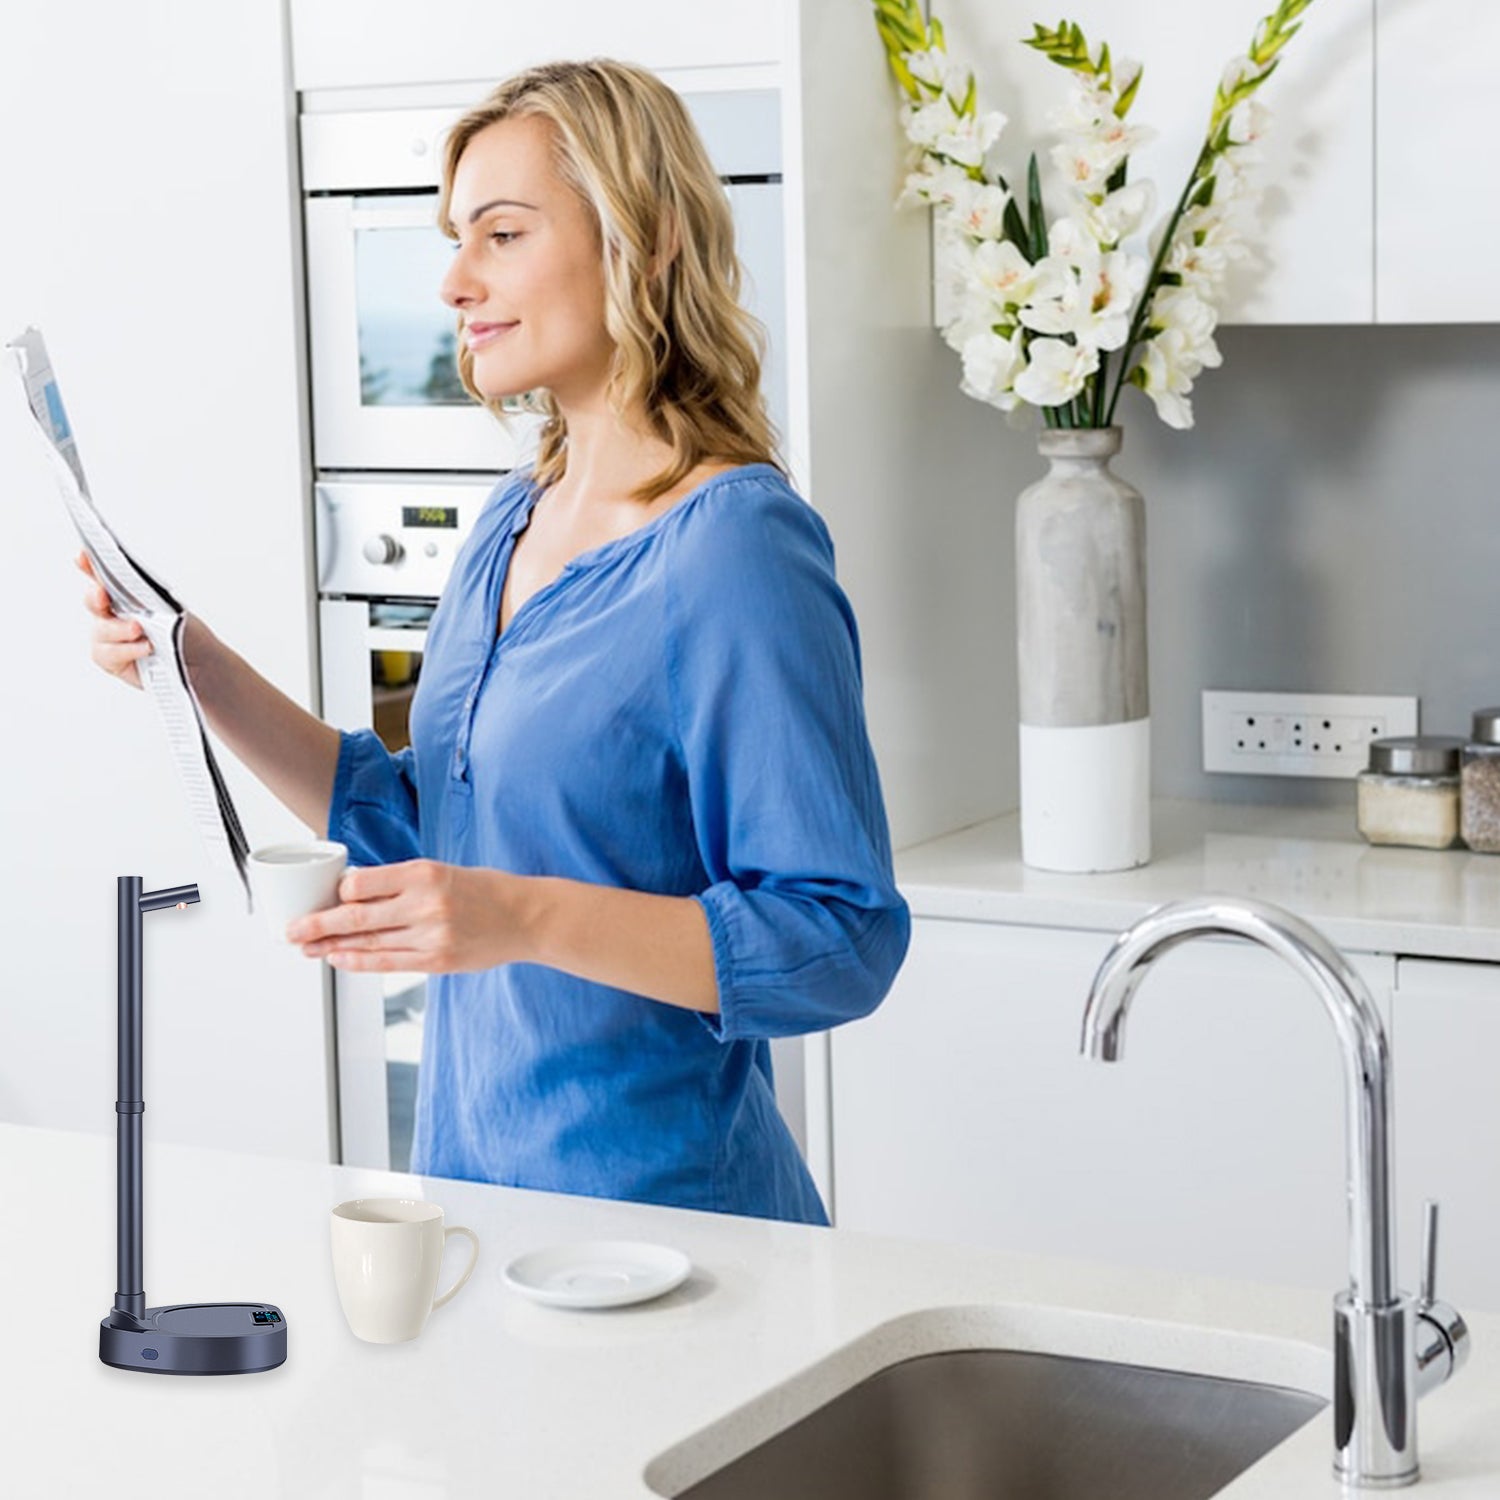 Smart Desktop Water Dispenser in Kitchen Use: A woman is using the Smart Desktop Water Dispenser in her kitchen. The dispenser is placed on the countertop, demonstrating its portability and convenience for home use.